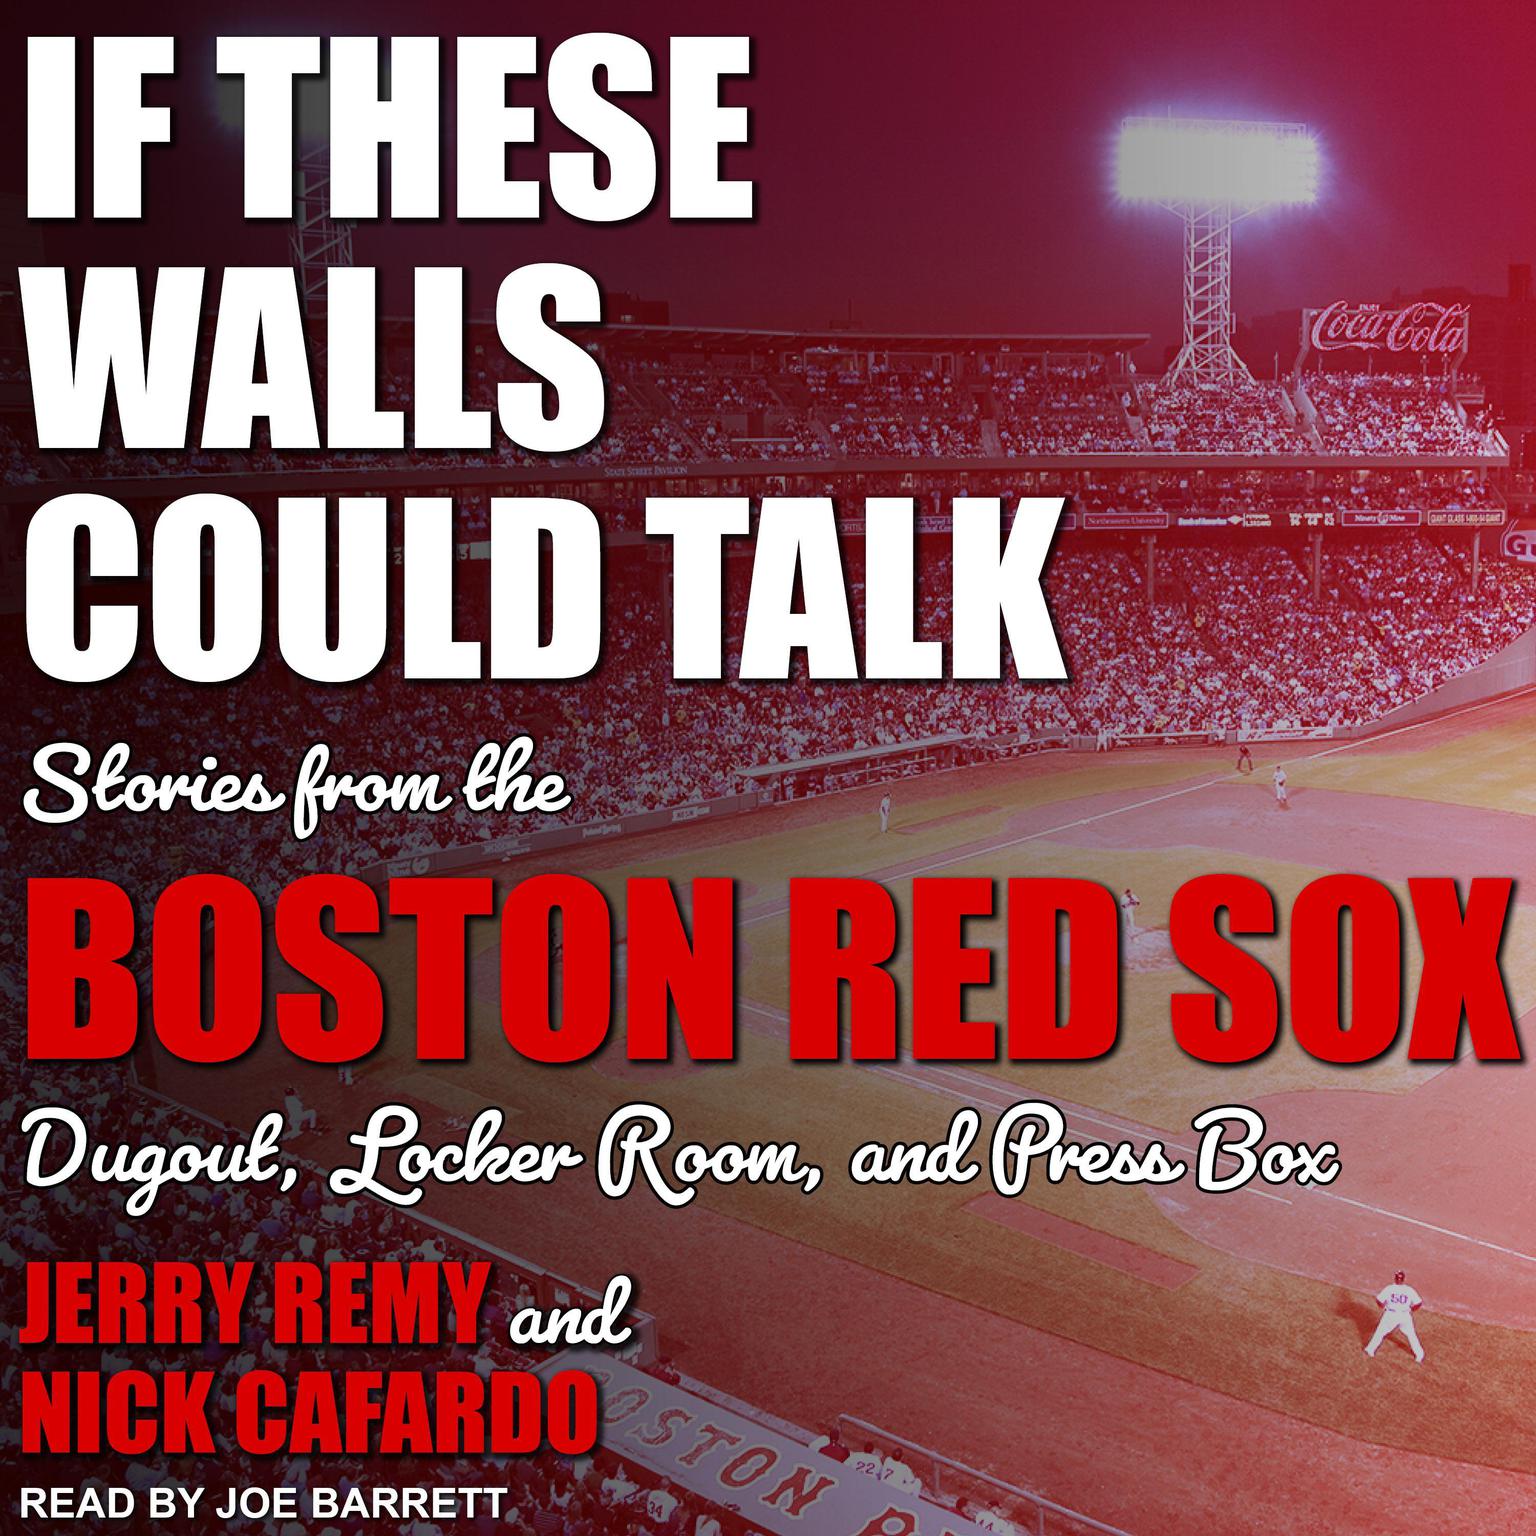 If These Walls Could Talk: Boston Red Sox Audiobook, by Jerry Remy